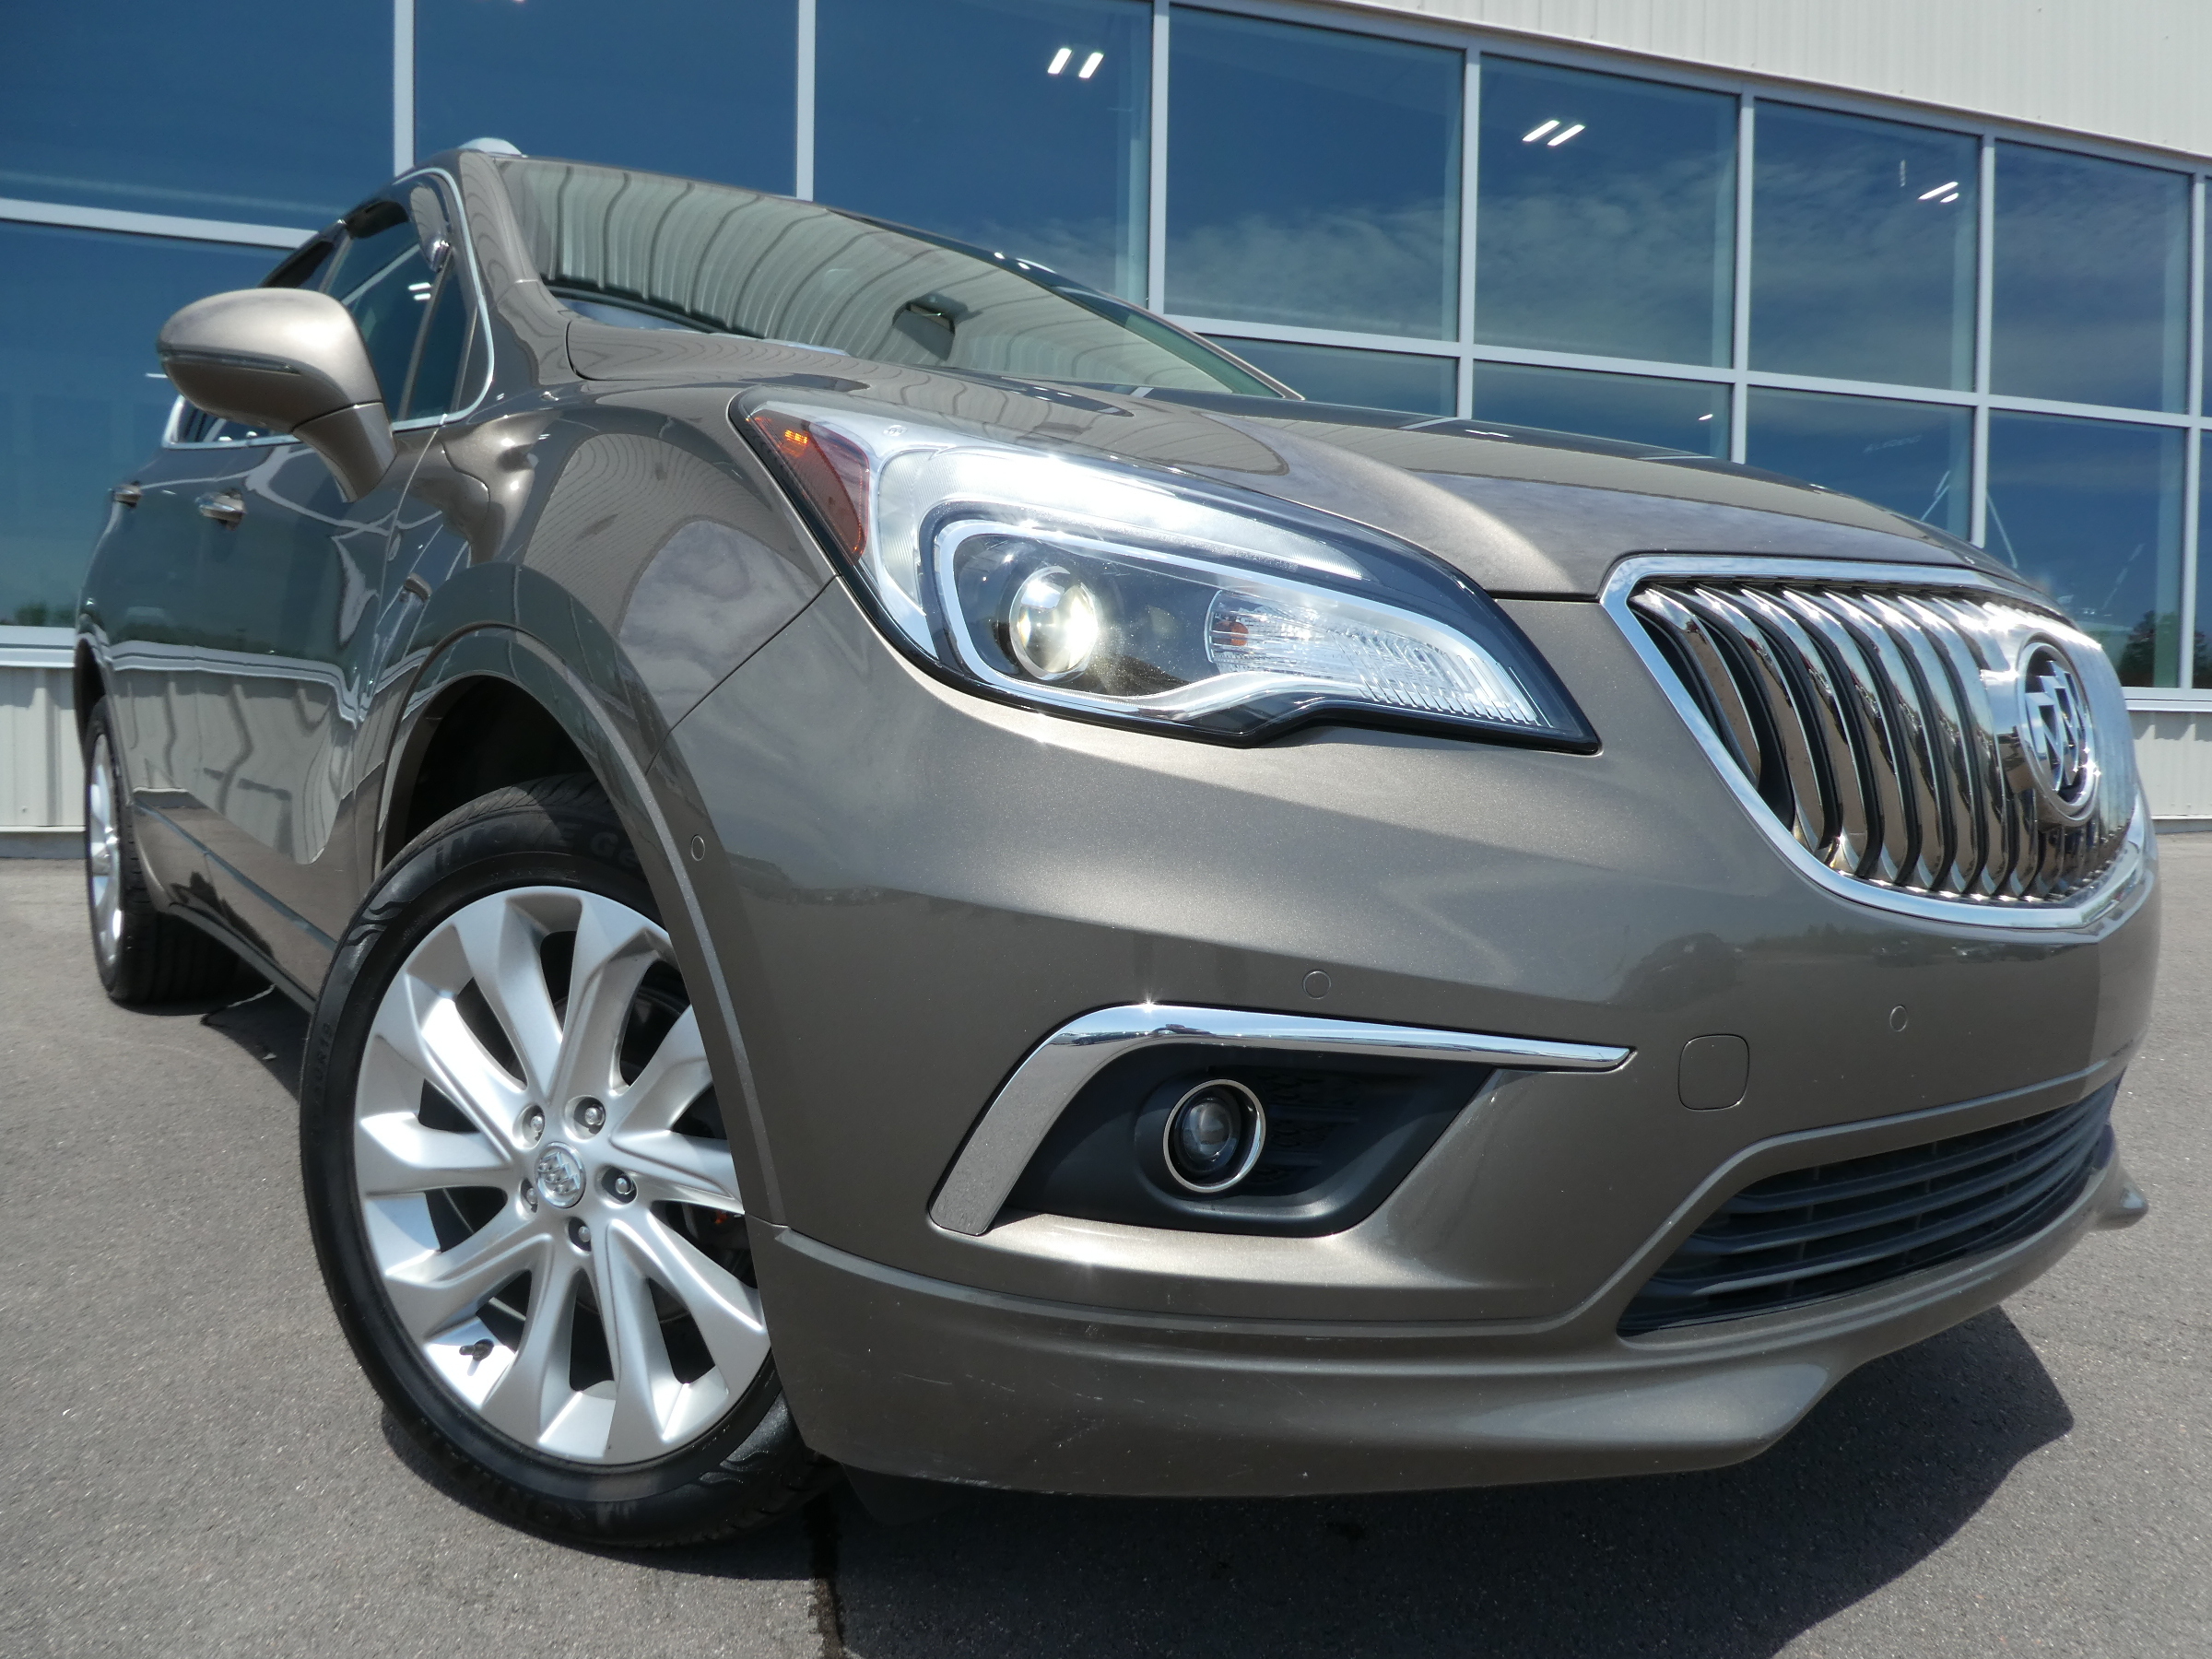 2016 Buick Envision AWD, Heads Up Display, Sunroof, Nav, Low KM's